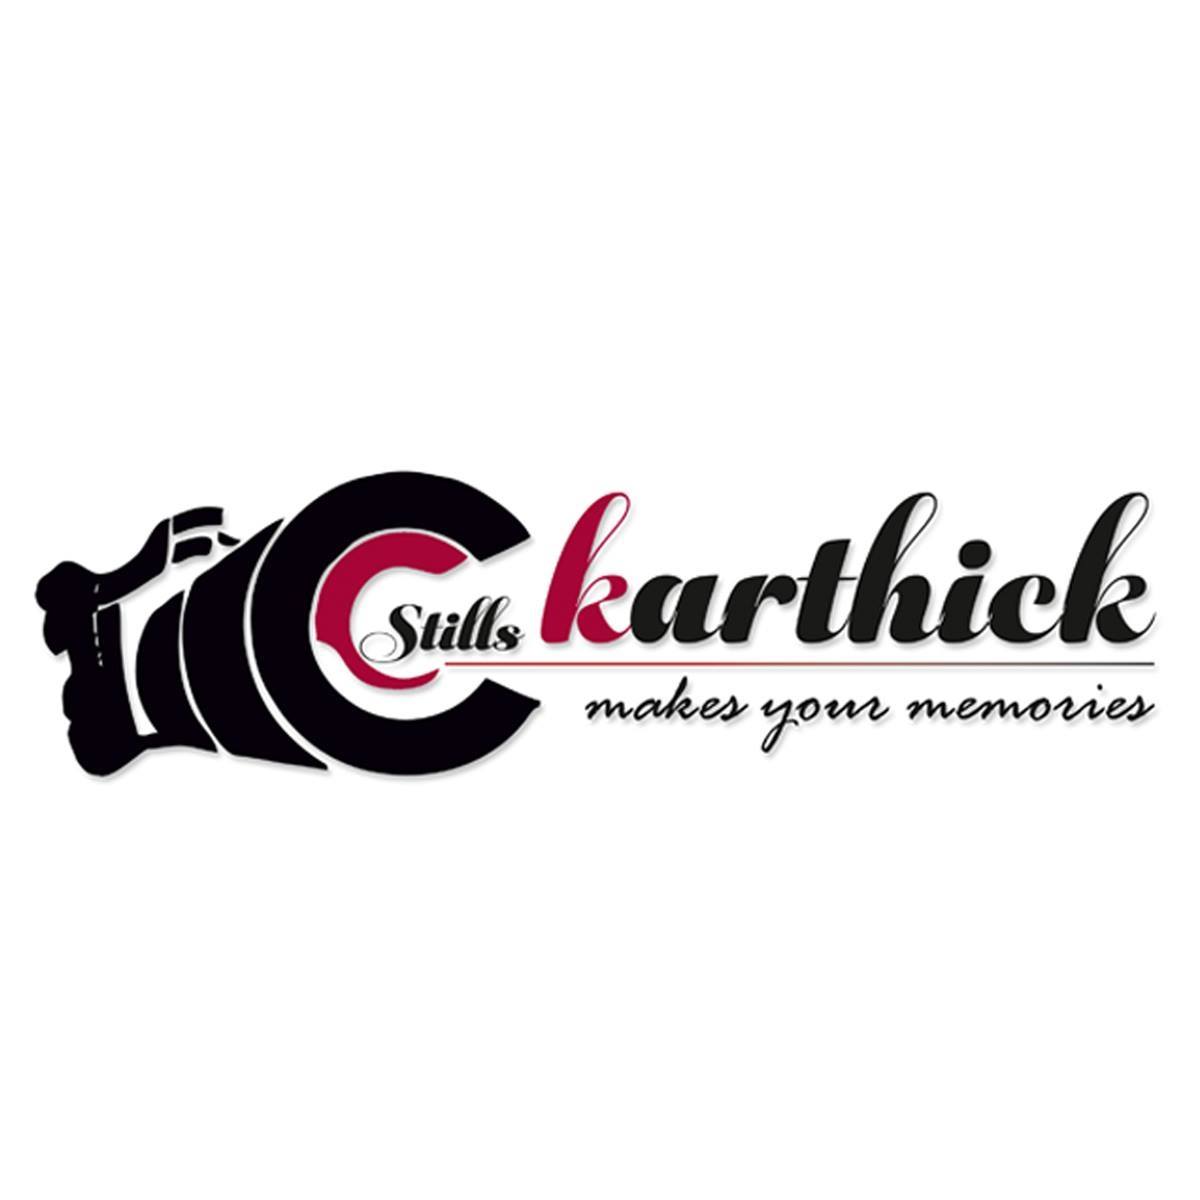 Stills karthick|Catering Services|Event Services